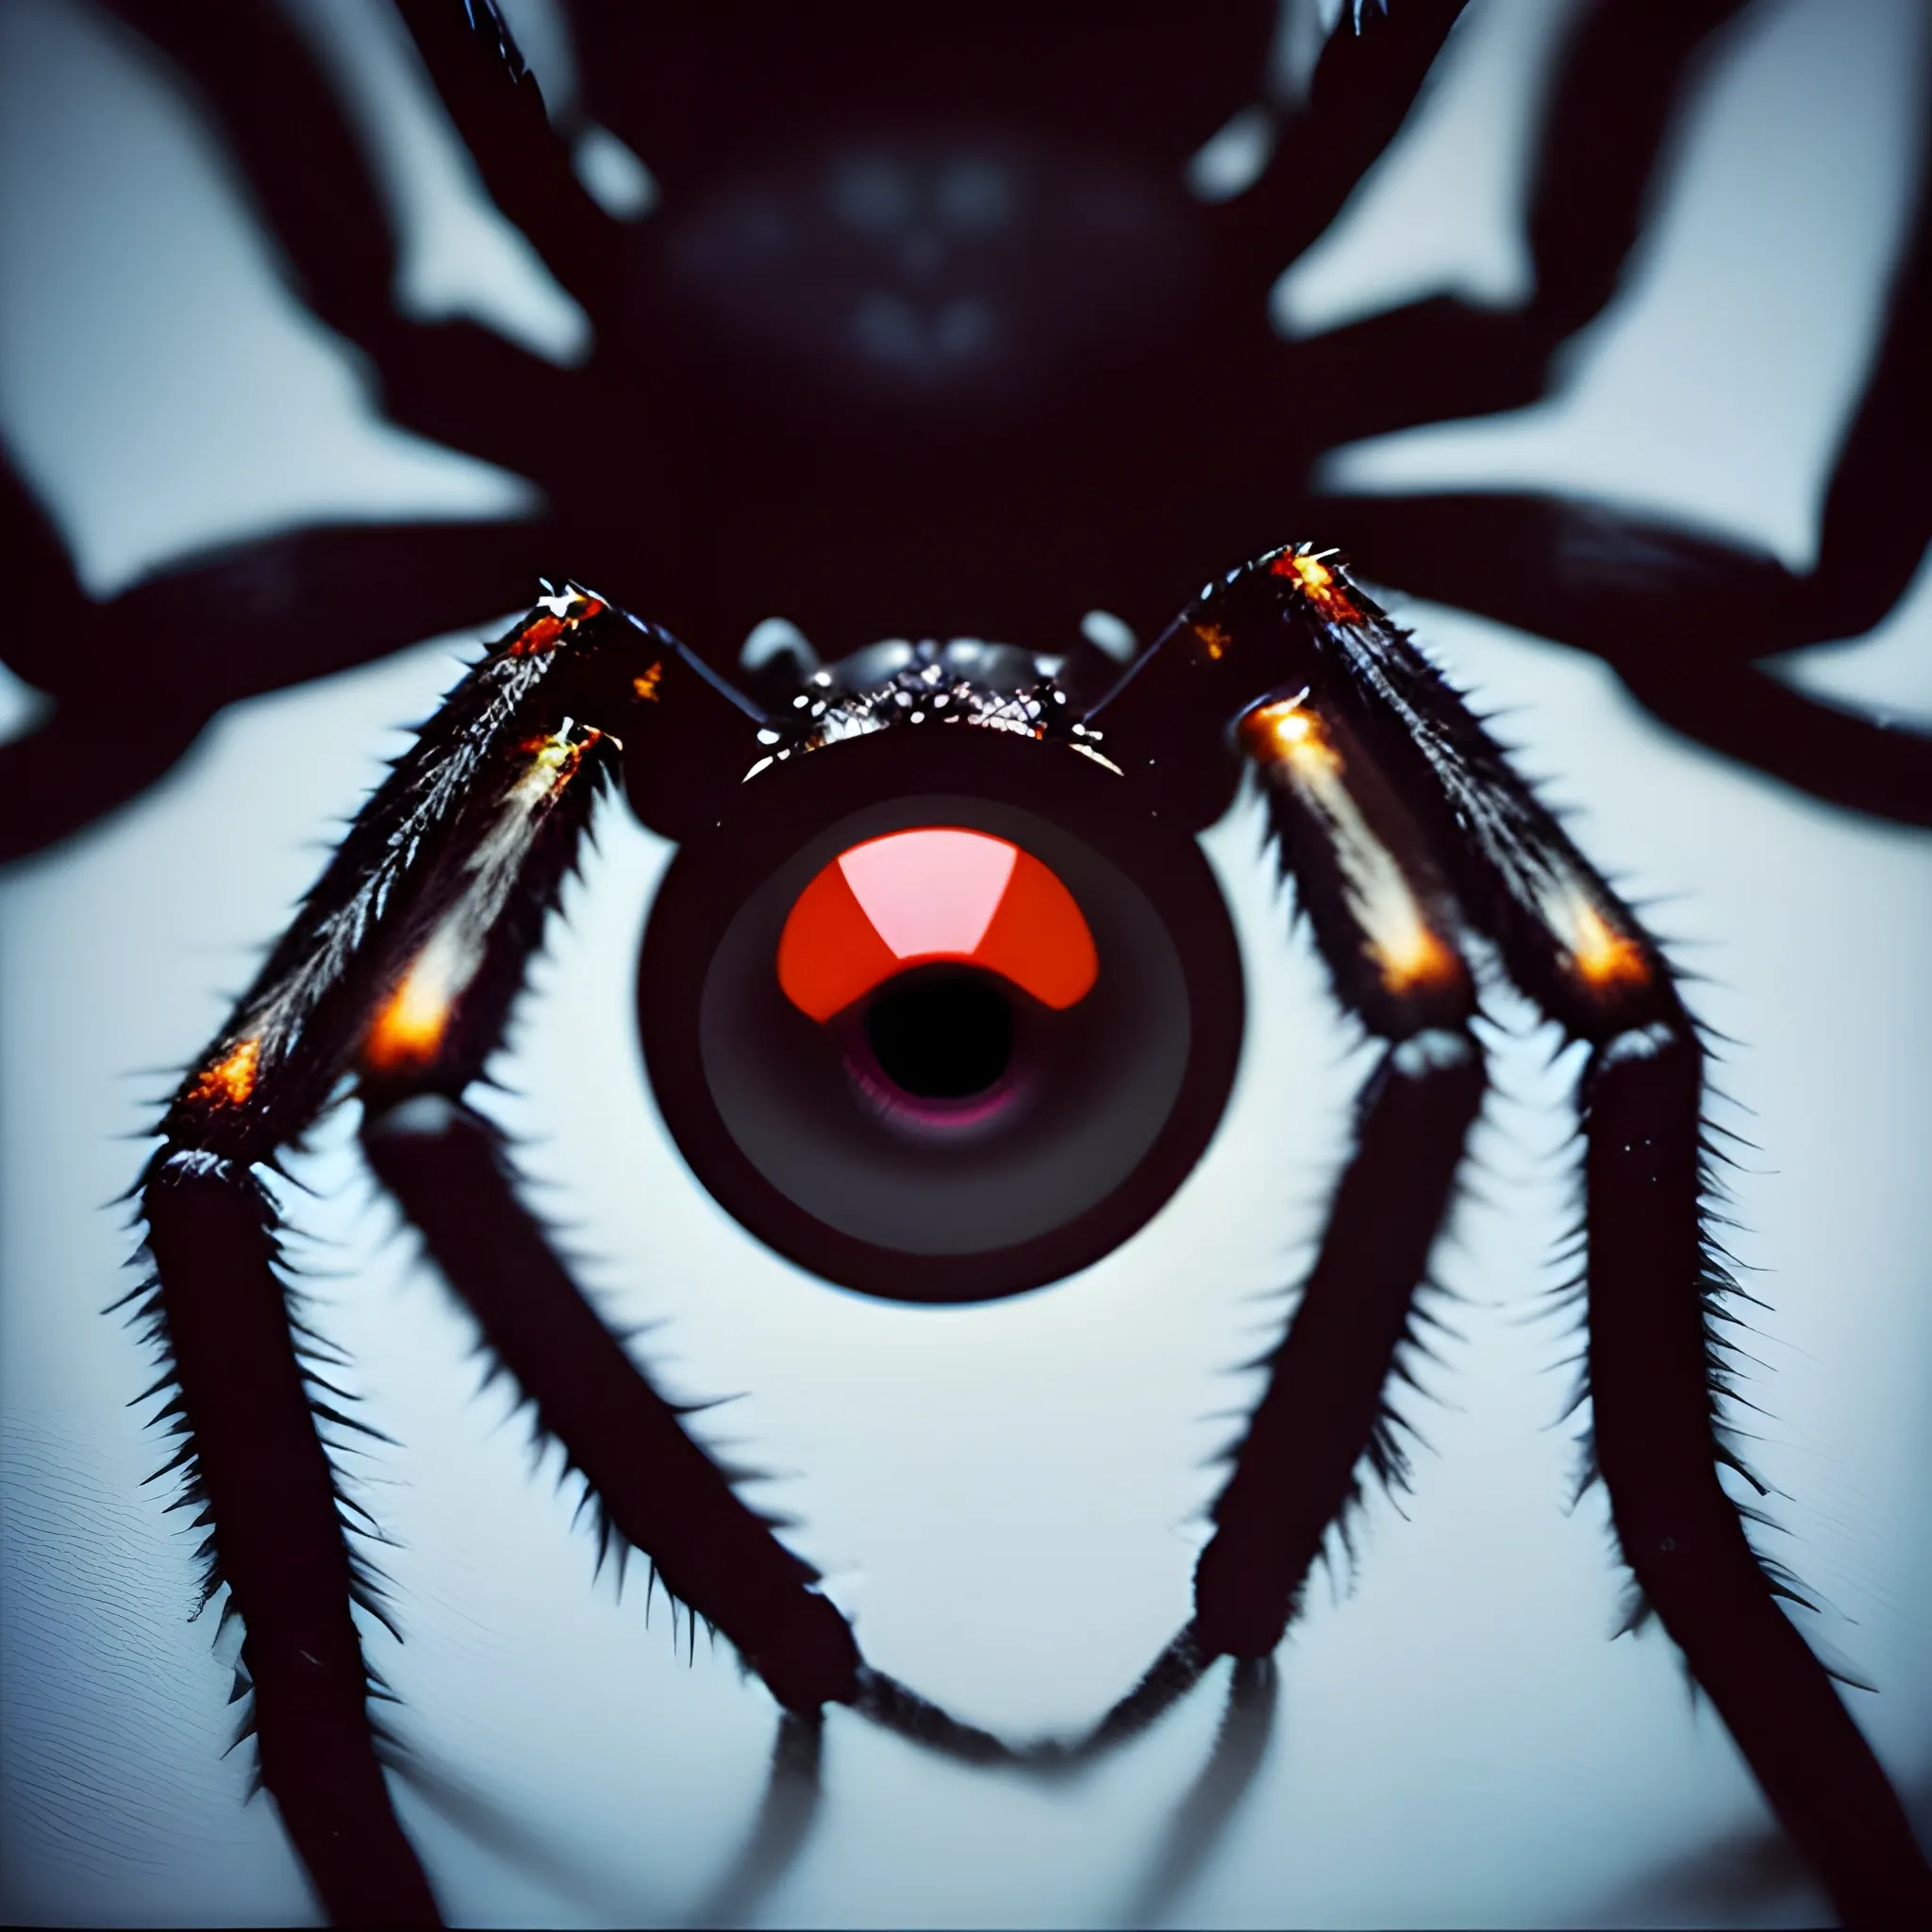 rfktrstyle, A stunning high quality macro photo of a painting of a spider on a strange sinister eyeball, in a dystopian city, mood lighting, Kodak Ultra Max, 85mm, shot on iphone 7, dslr, high quality, photorealistic, raw, 4k, dark surrealism